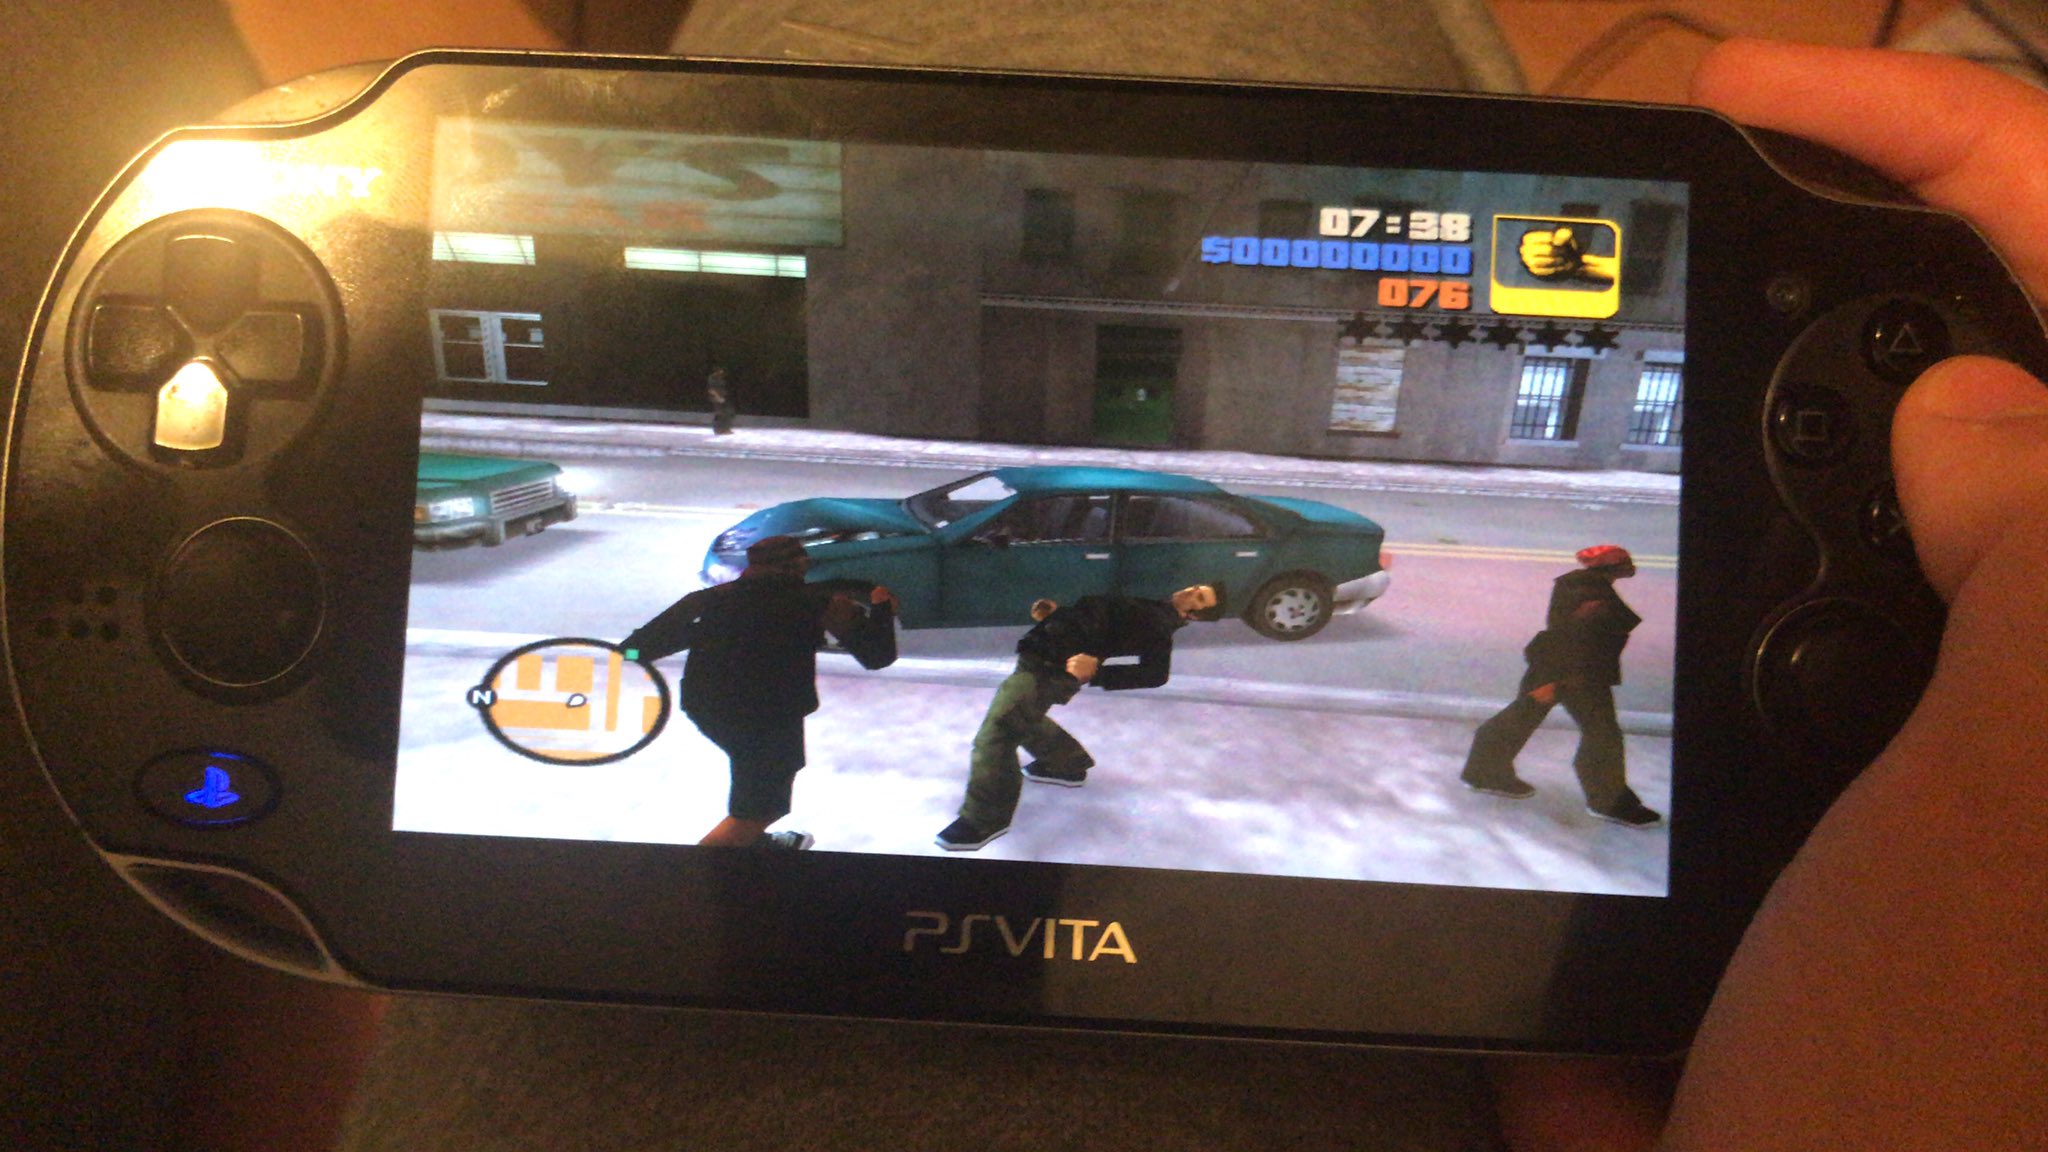 Samilop Cimmerian Iter Gta Iii On Psvita It S Possible Awesome Job From The Re3 Modding Group And The Co Effort From Rinnegatamante And Theflow0 The Frame Rate Makes The Game Playable